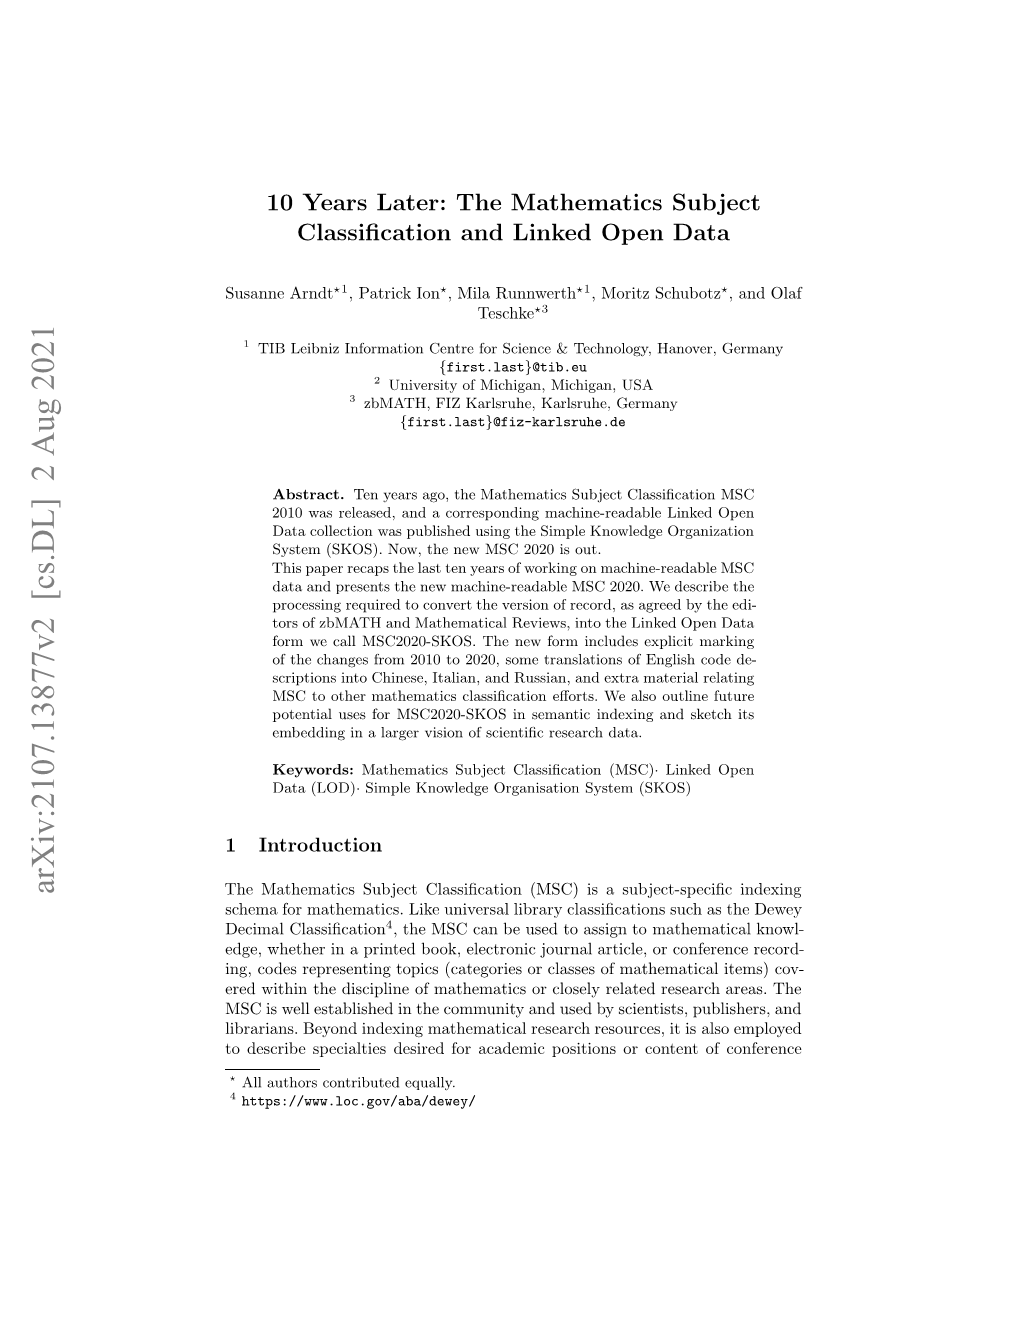 10 Years Later: the Mathematics Subject Classification and Linked